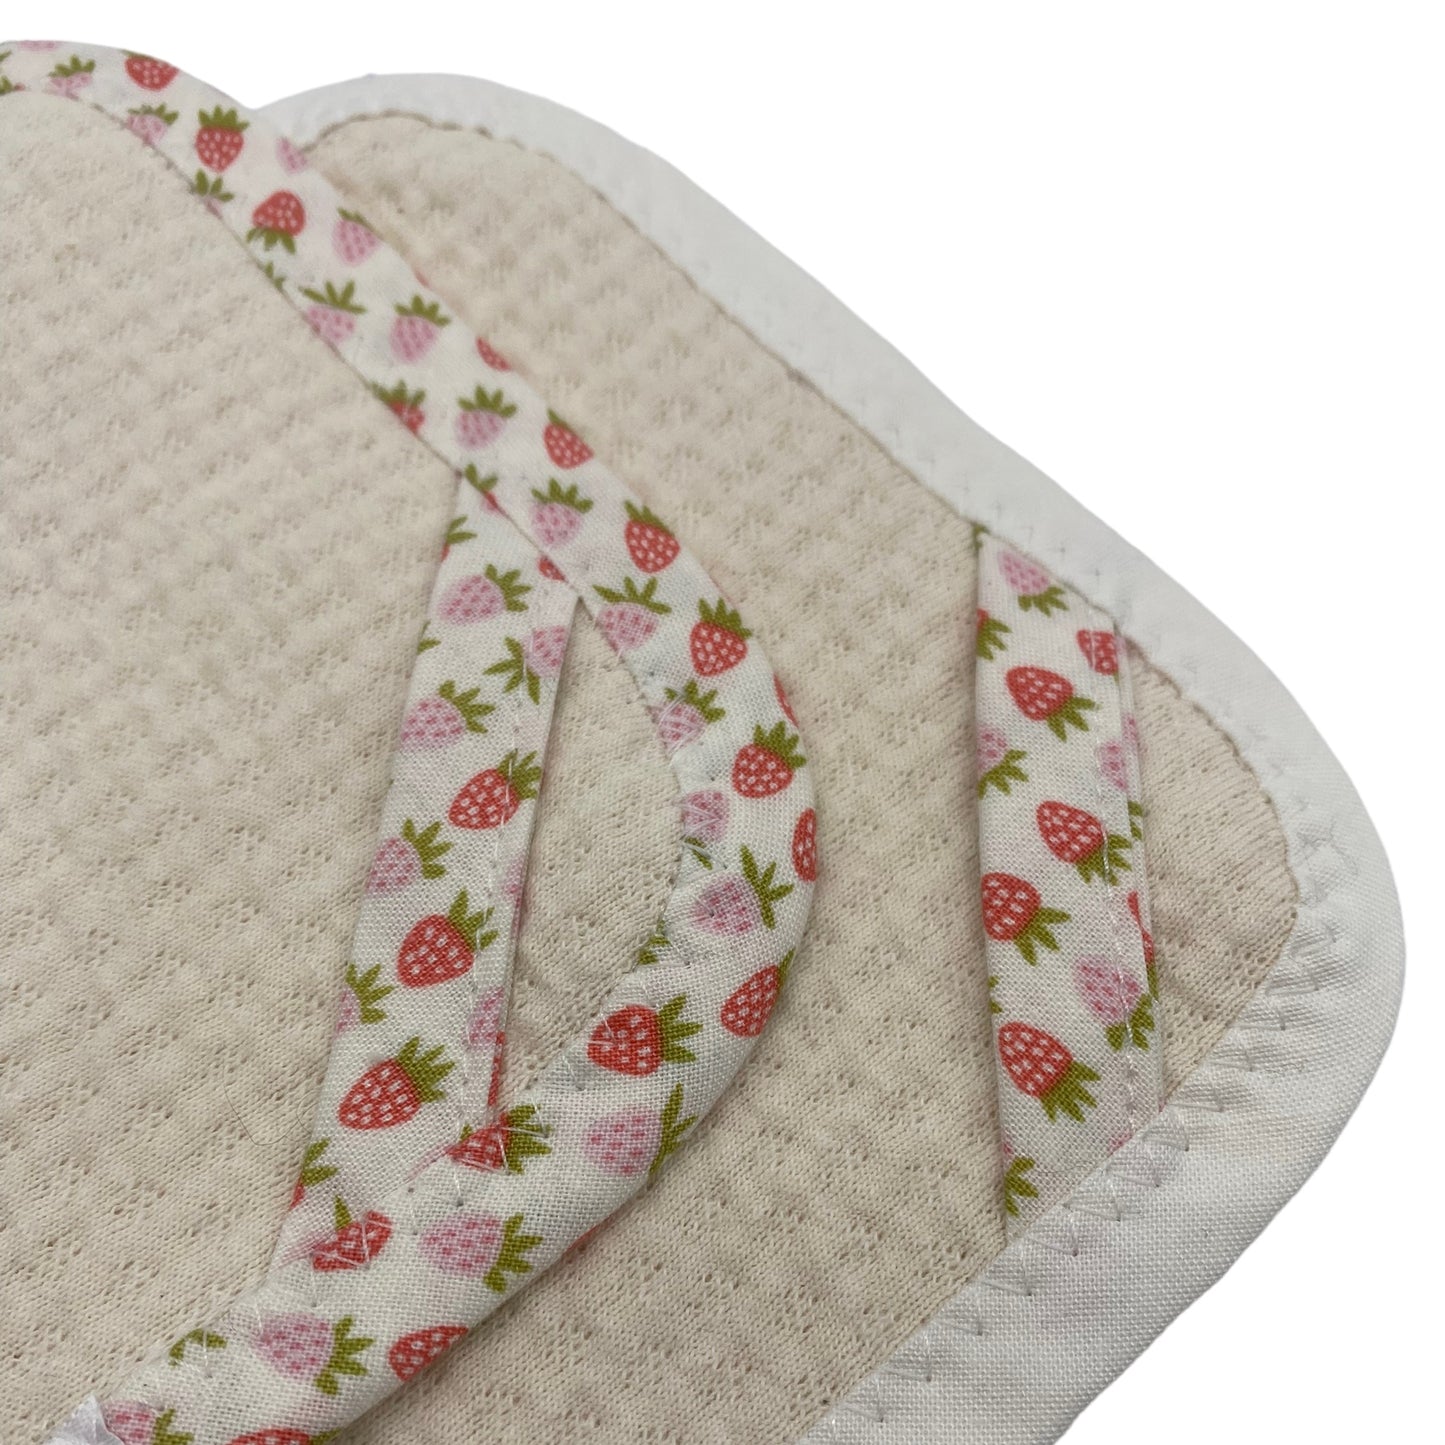 Set of 2 TINY Reusable Paper Towels - Strawberries and Solid White